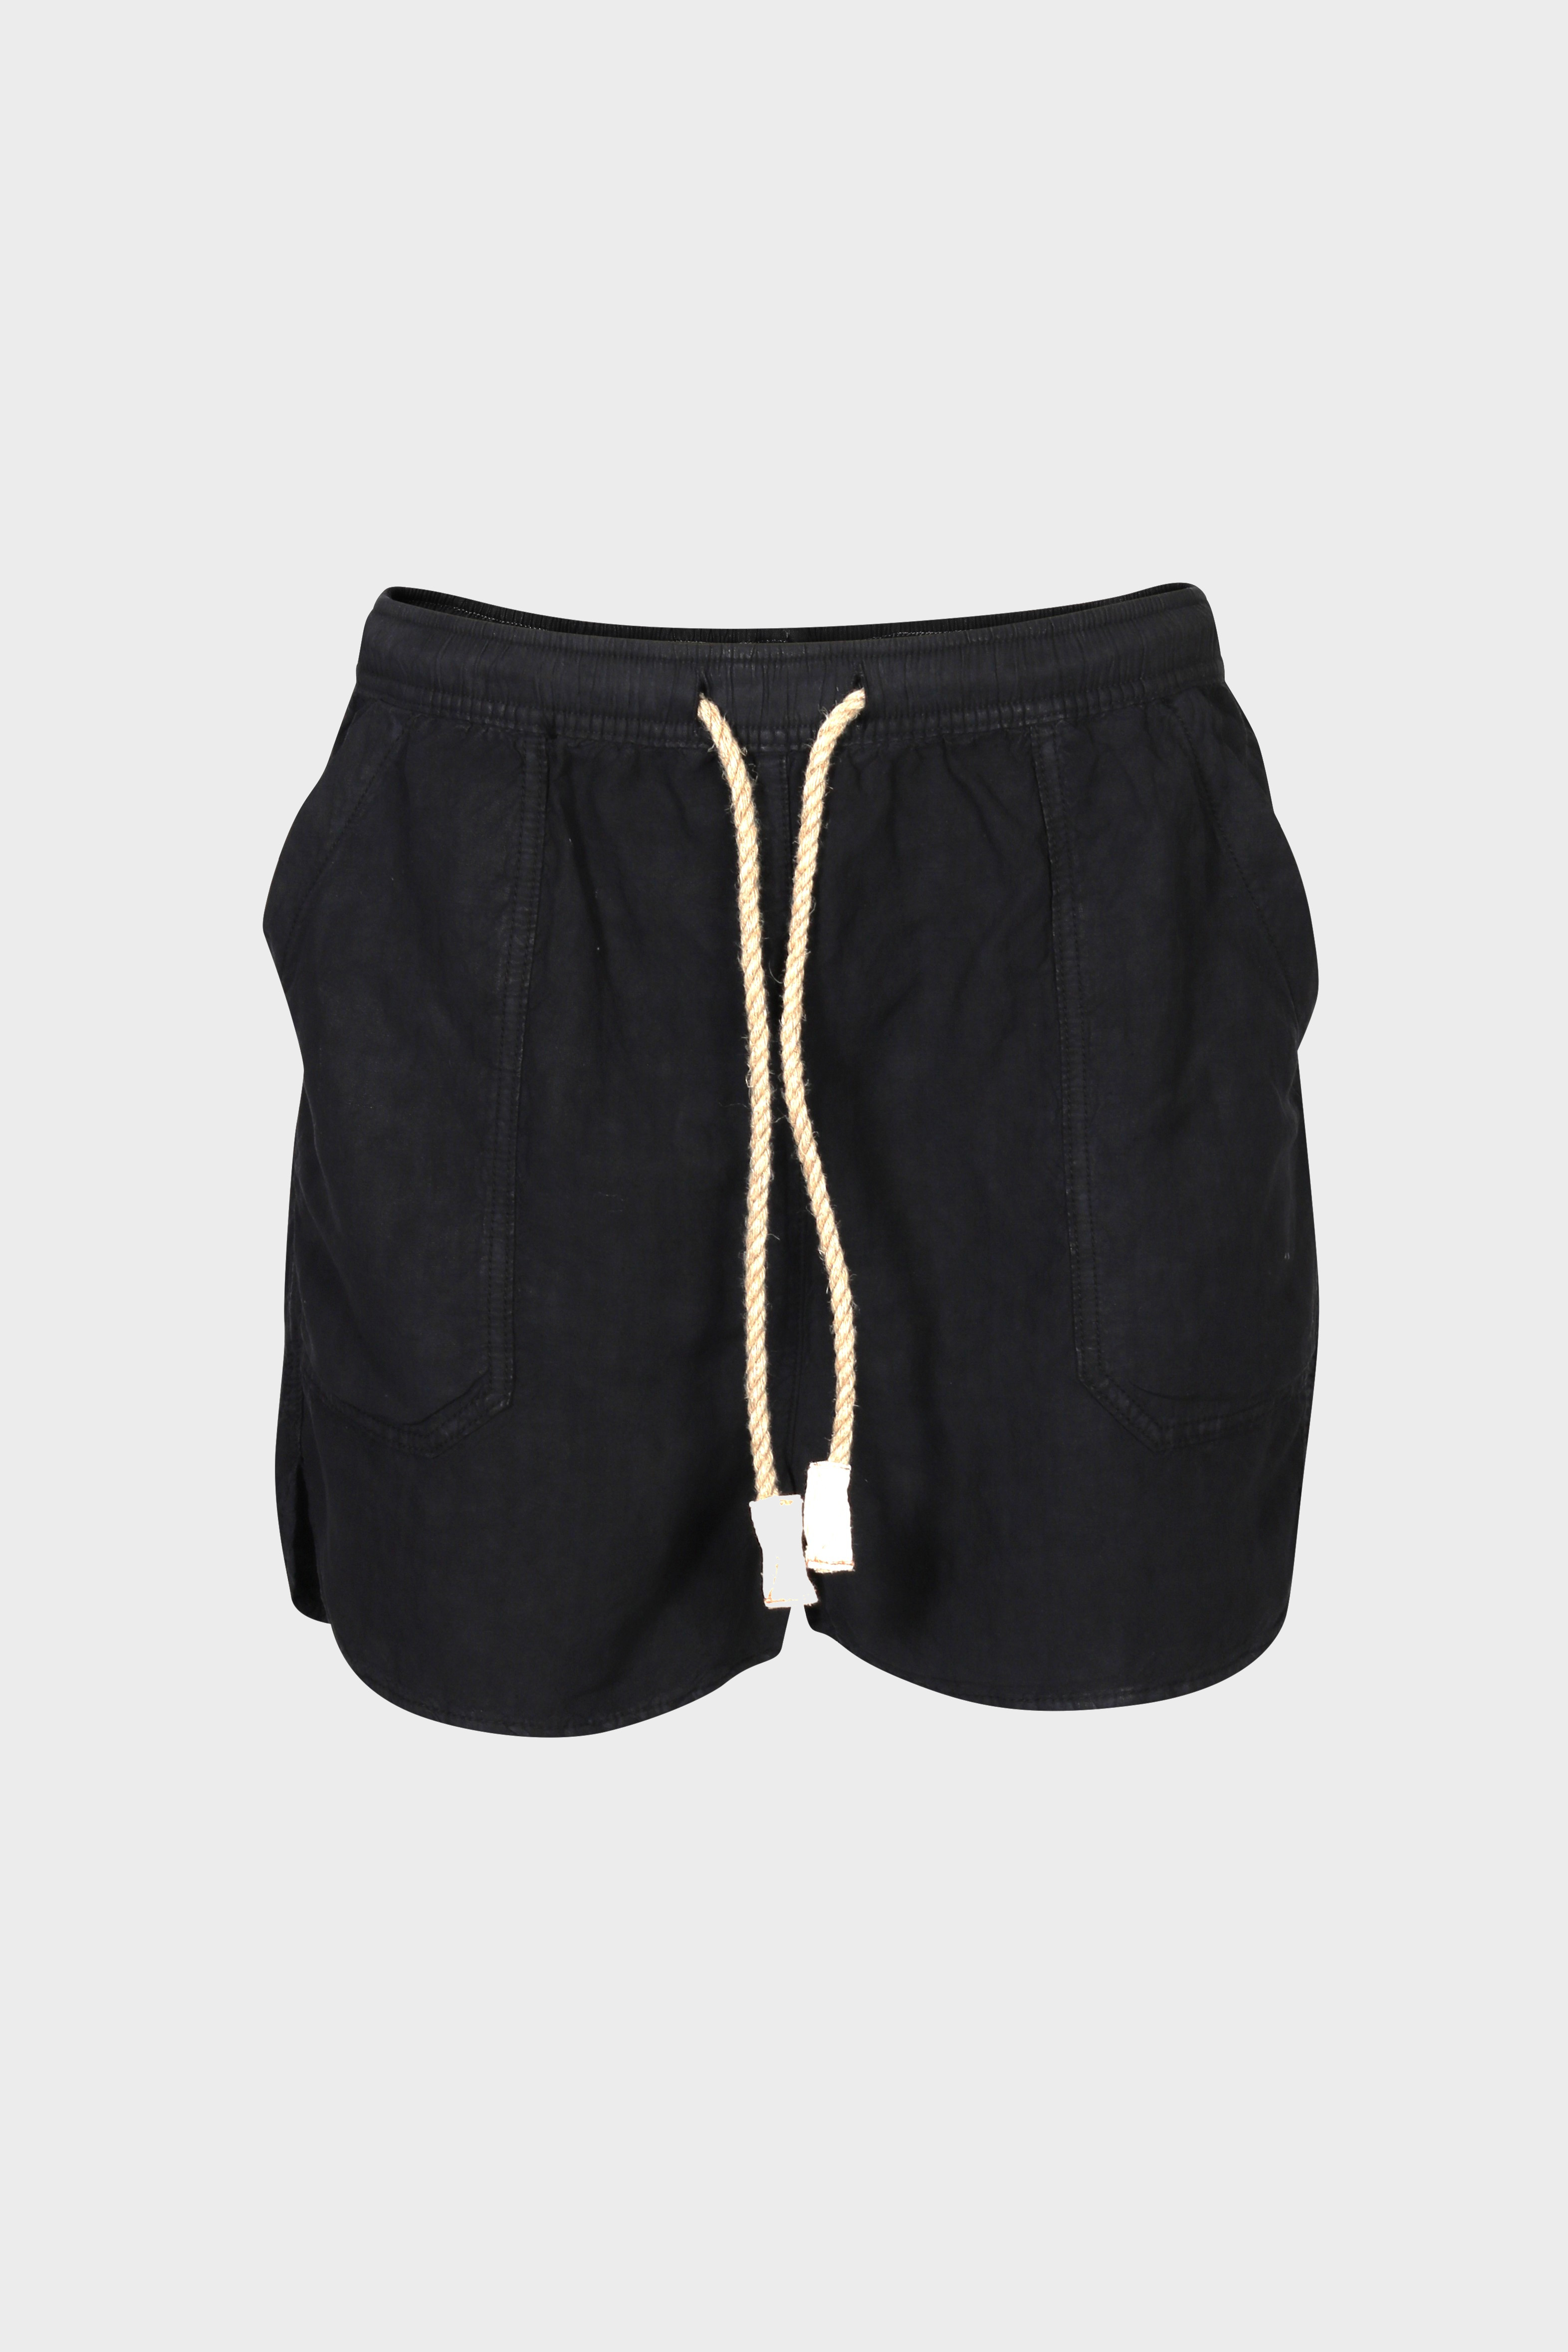 DR. COLLECTORS Weekend Silk Shorts in Black